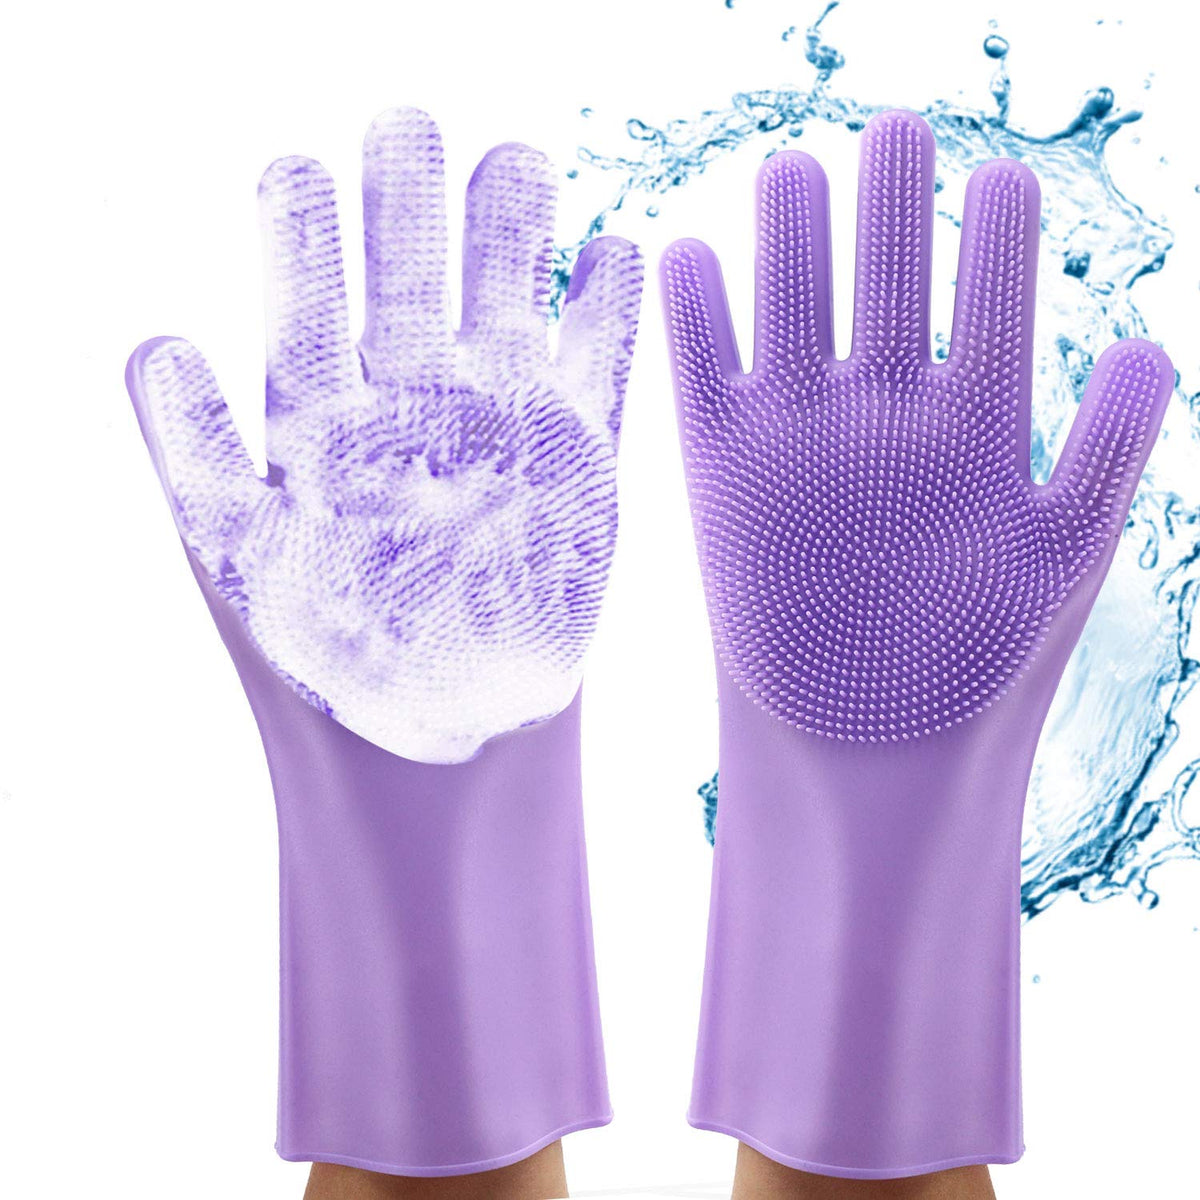 Commodious Lavender Non-Slip Yoga Wrist Support Gloves with Silica